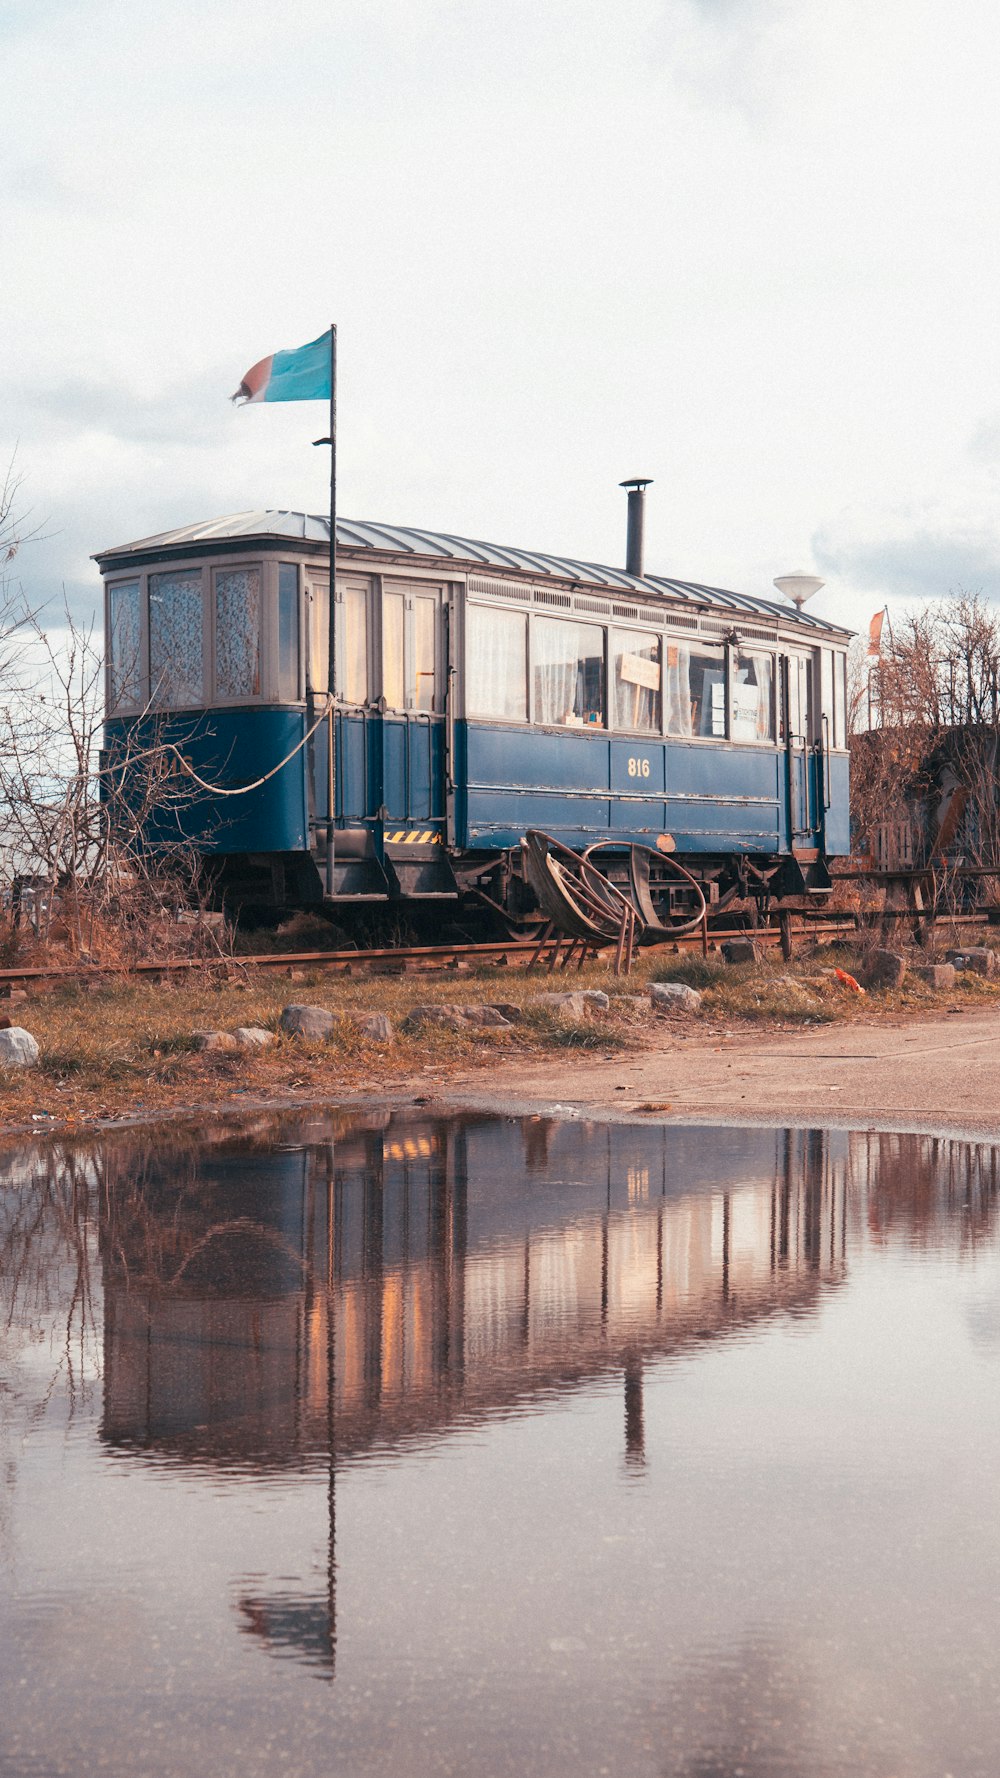 a blue train car sitting next to a body of water